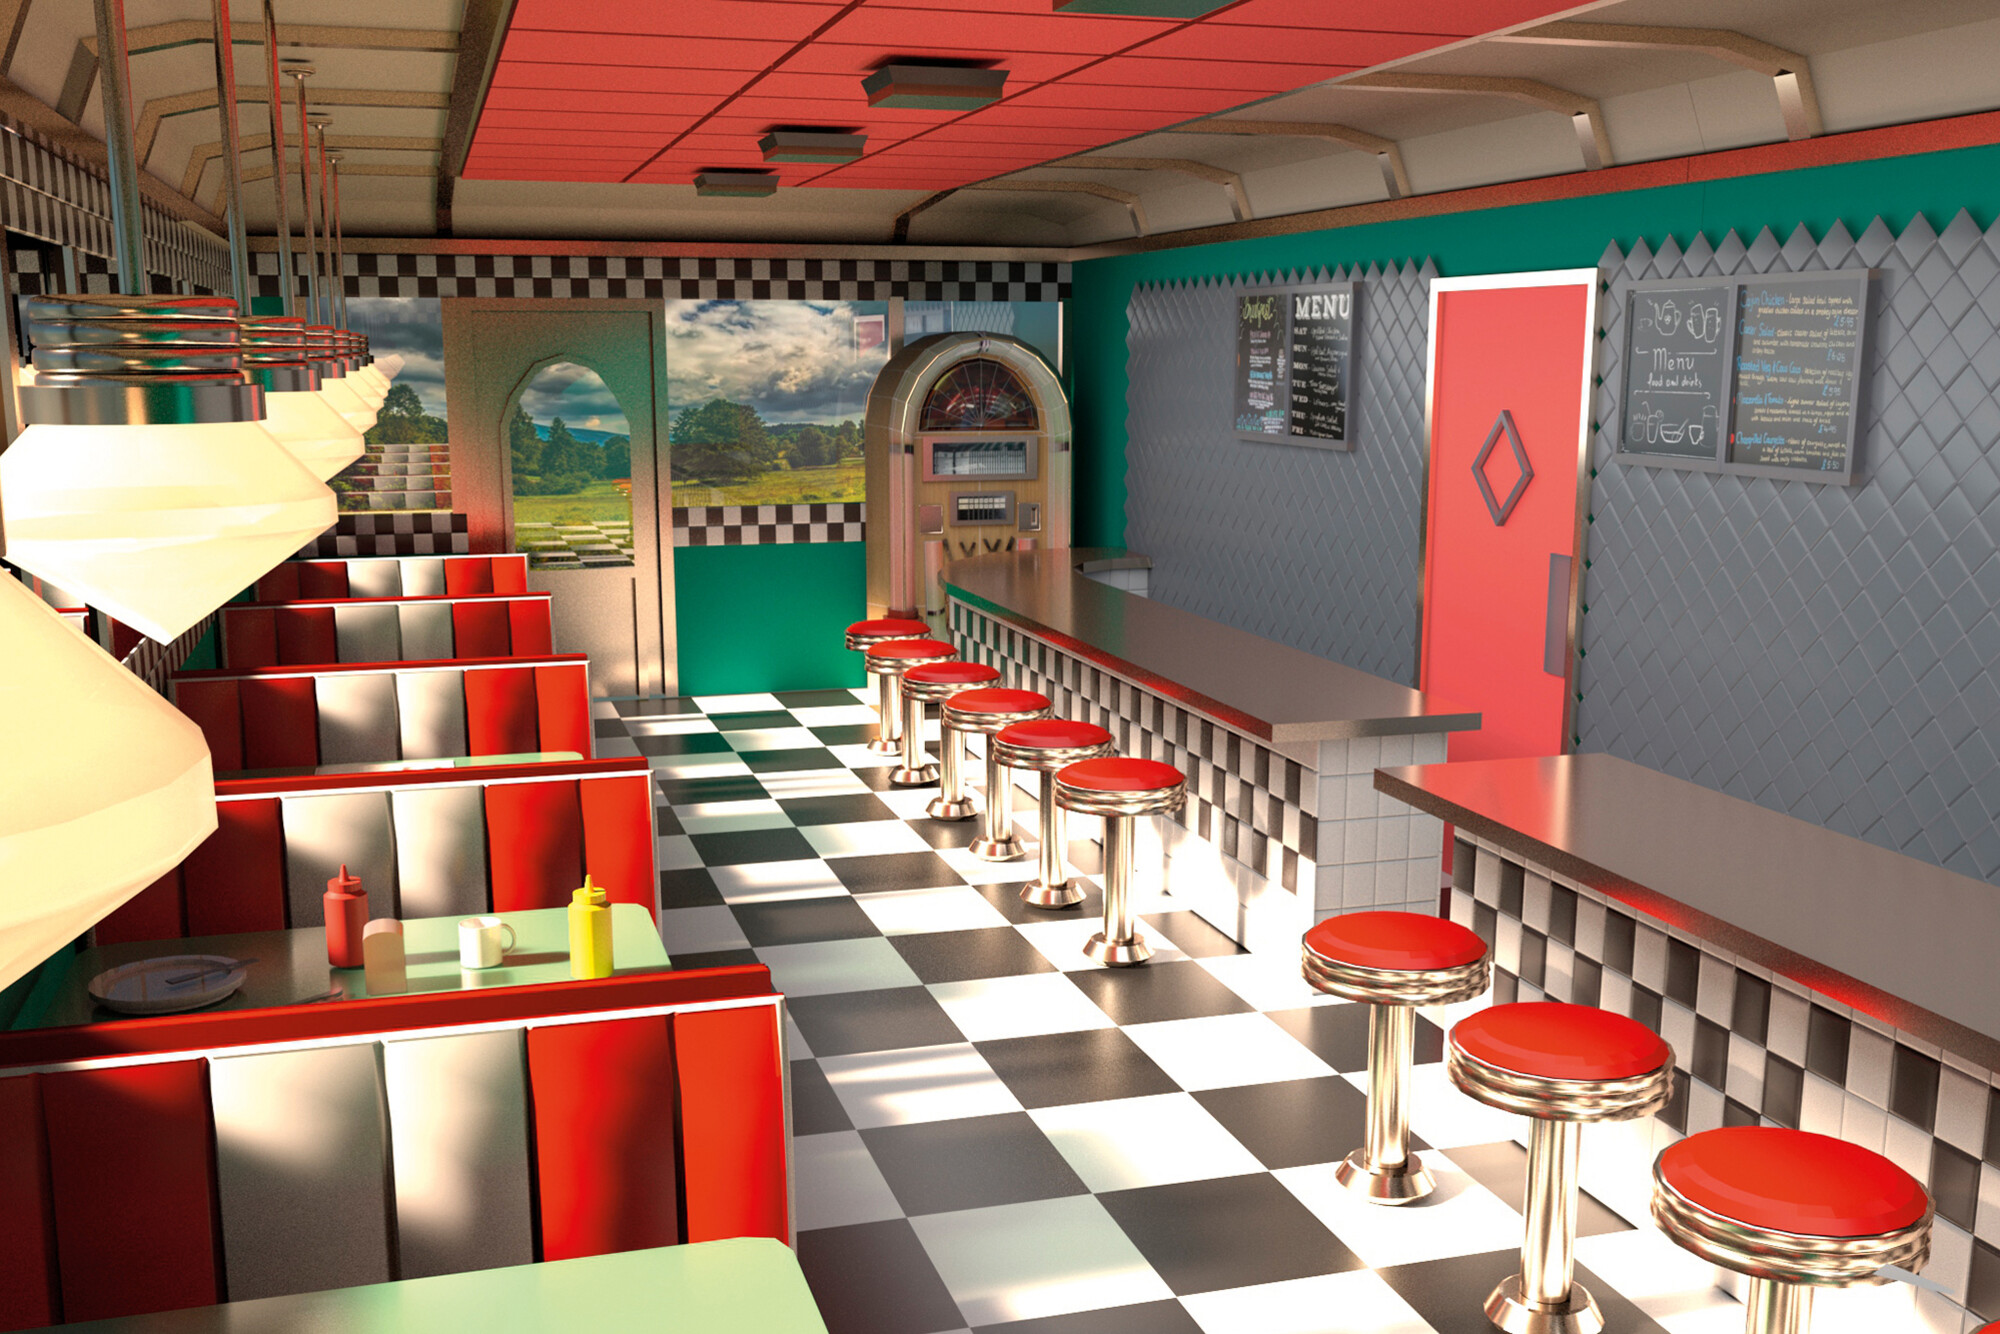 Video game rendering of a diner interior.